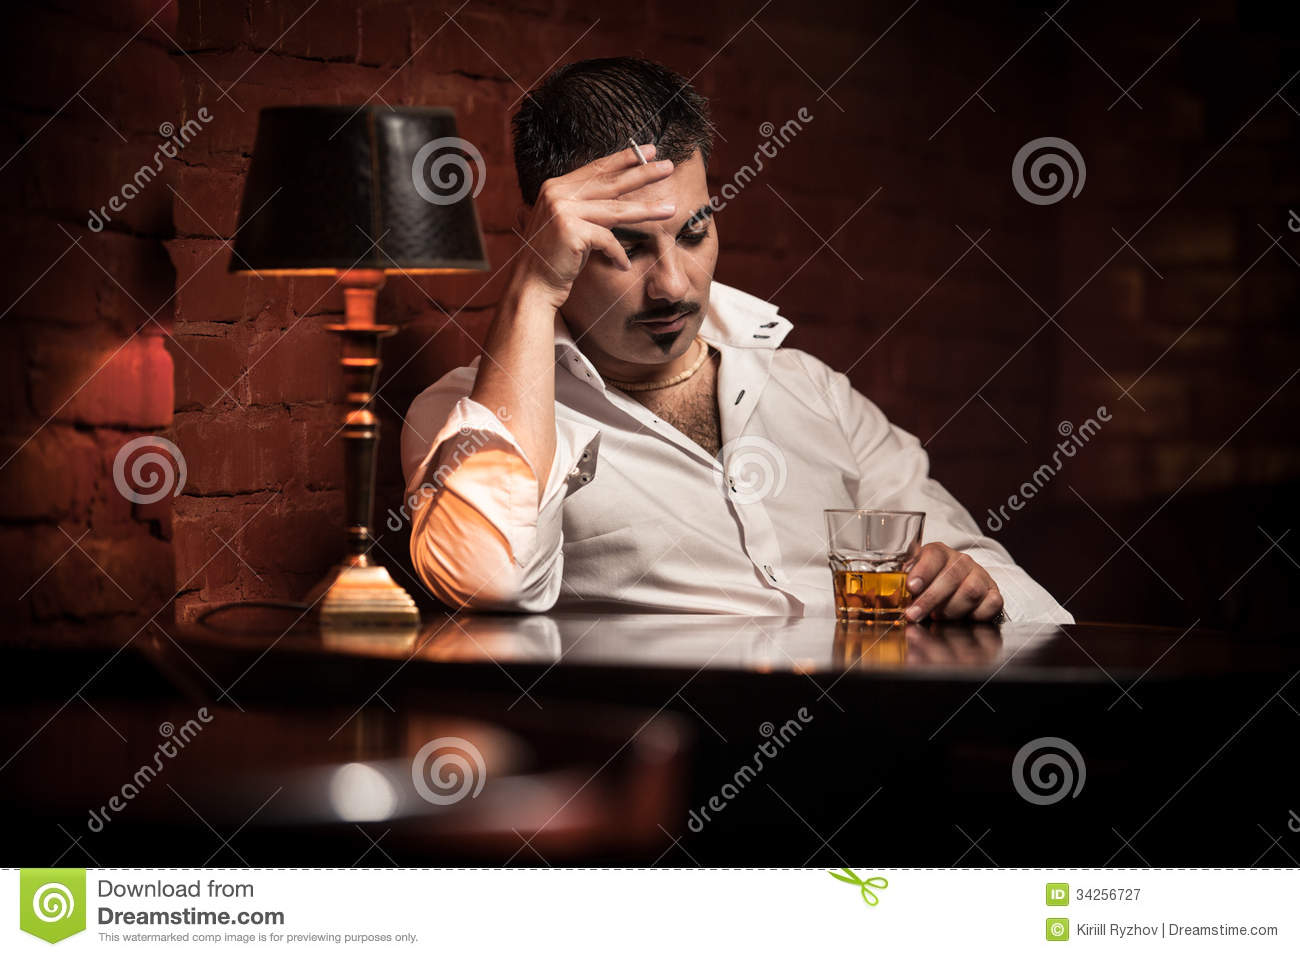 Free Stock Photography  Man Smoking Cigarette And Drinking Whiskey